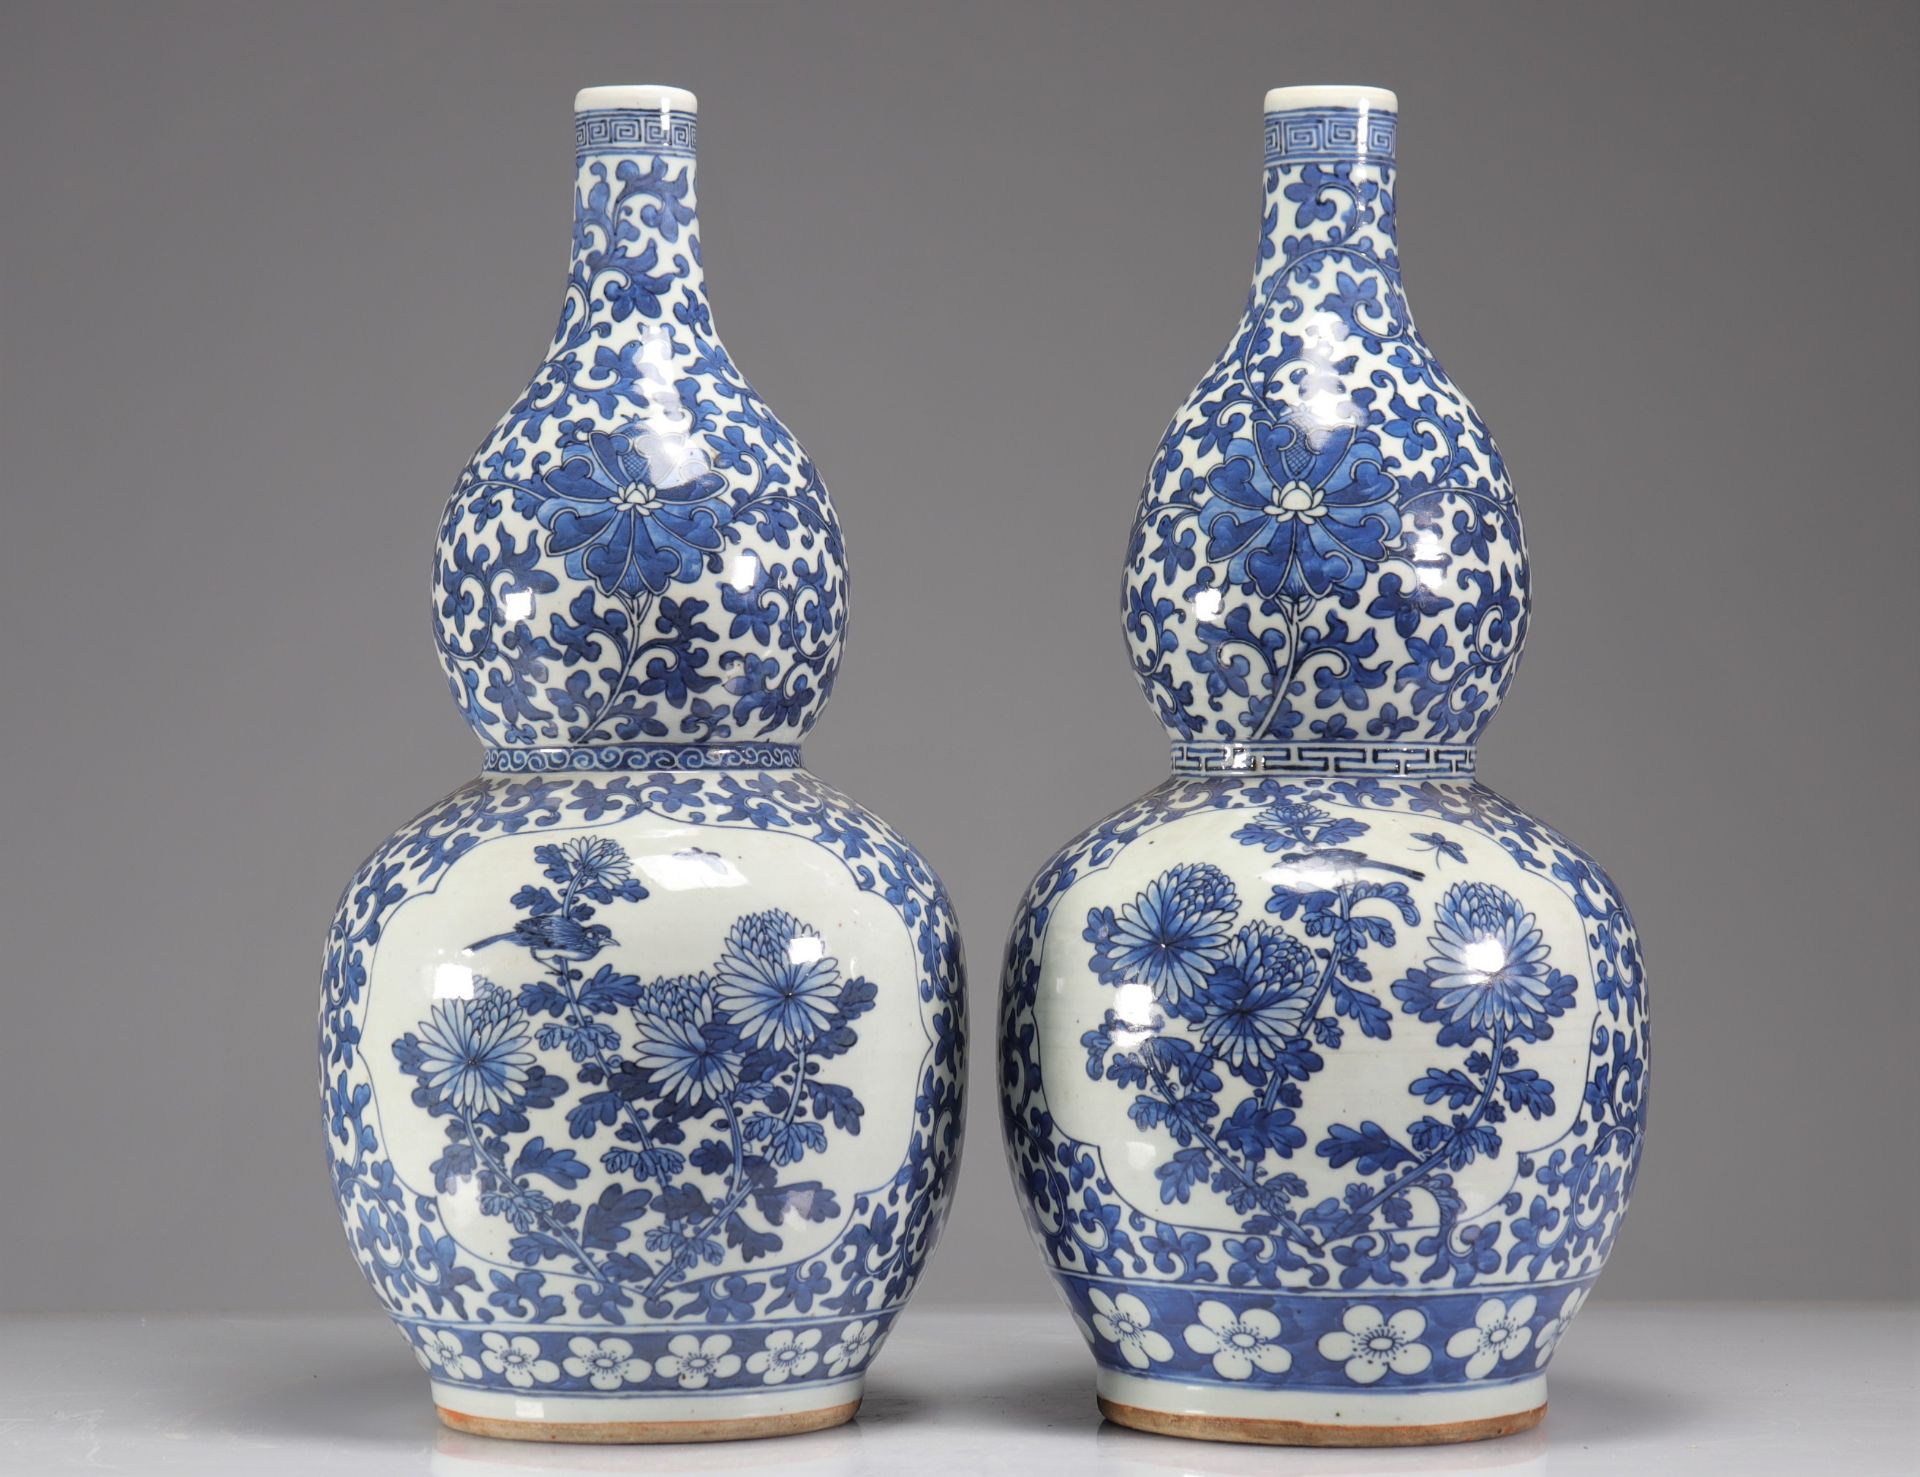 Pair of double-gourd vases in blue-white enamelled porcelain decorated with floriform medallions of - Image 3 of 5